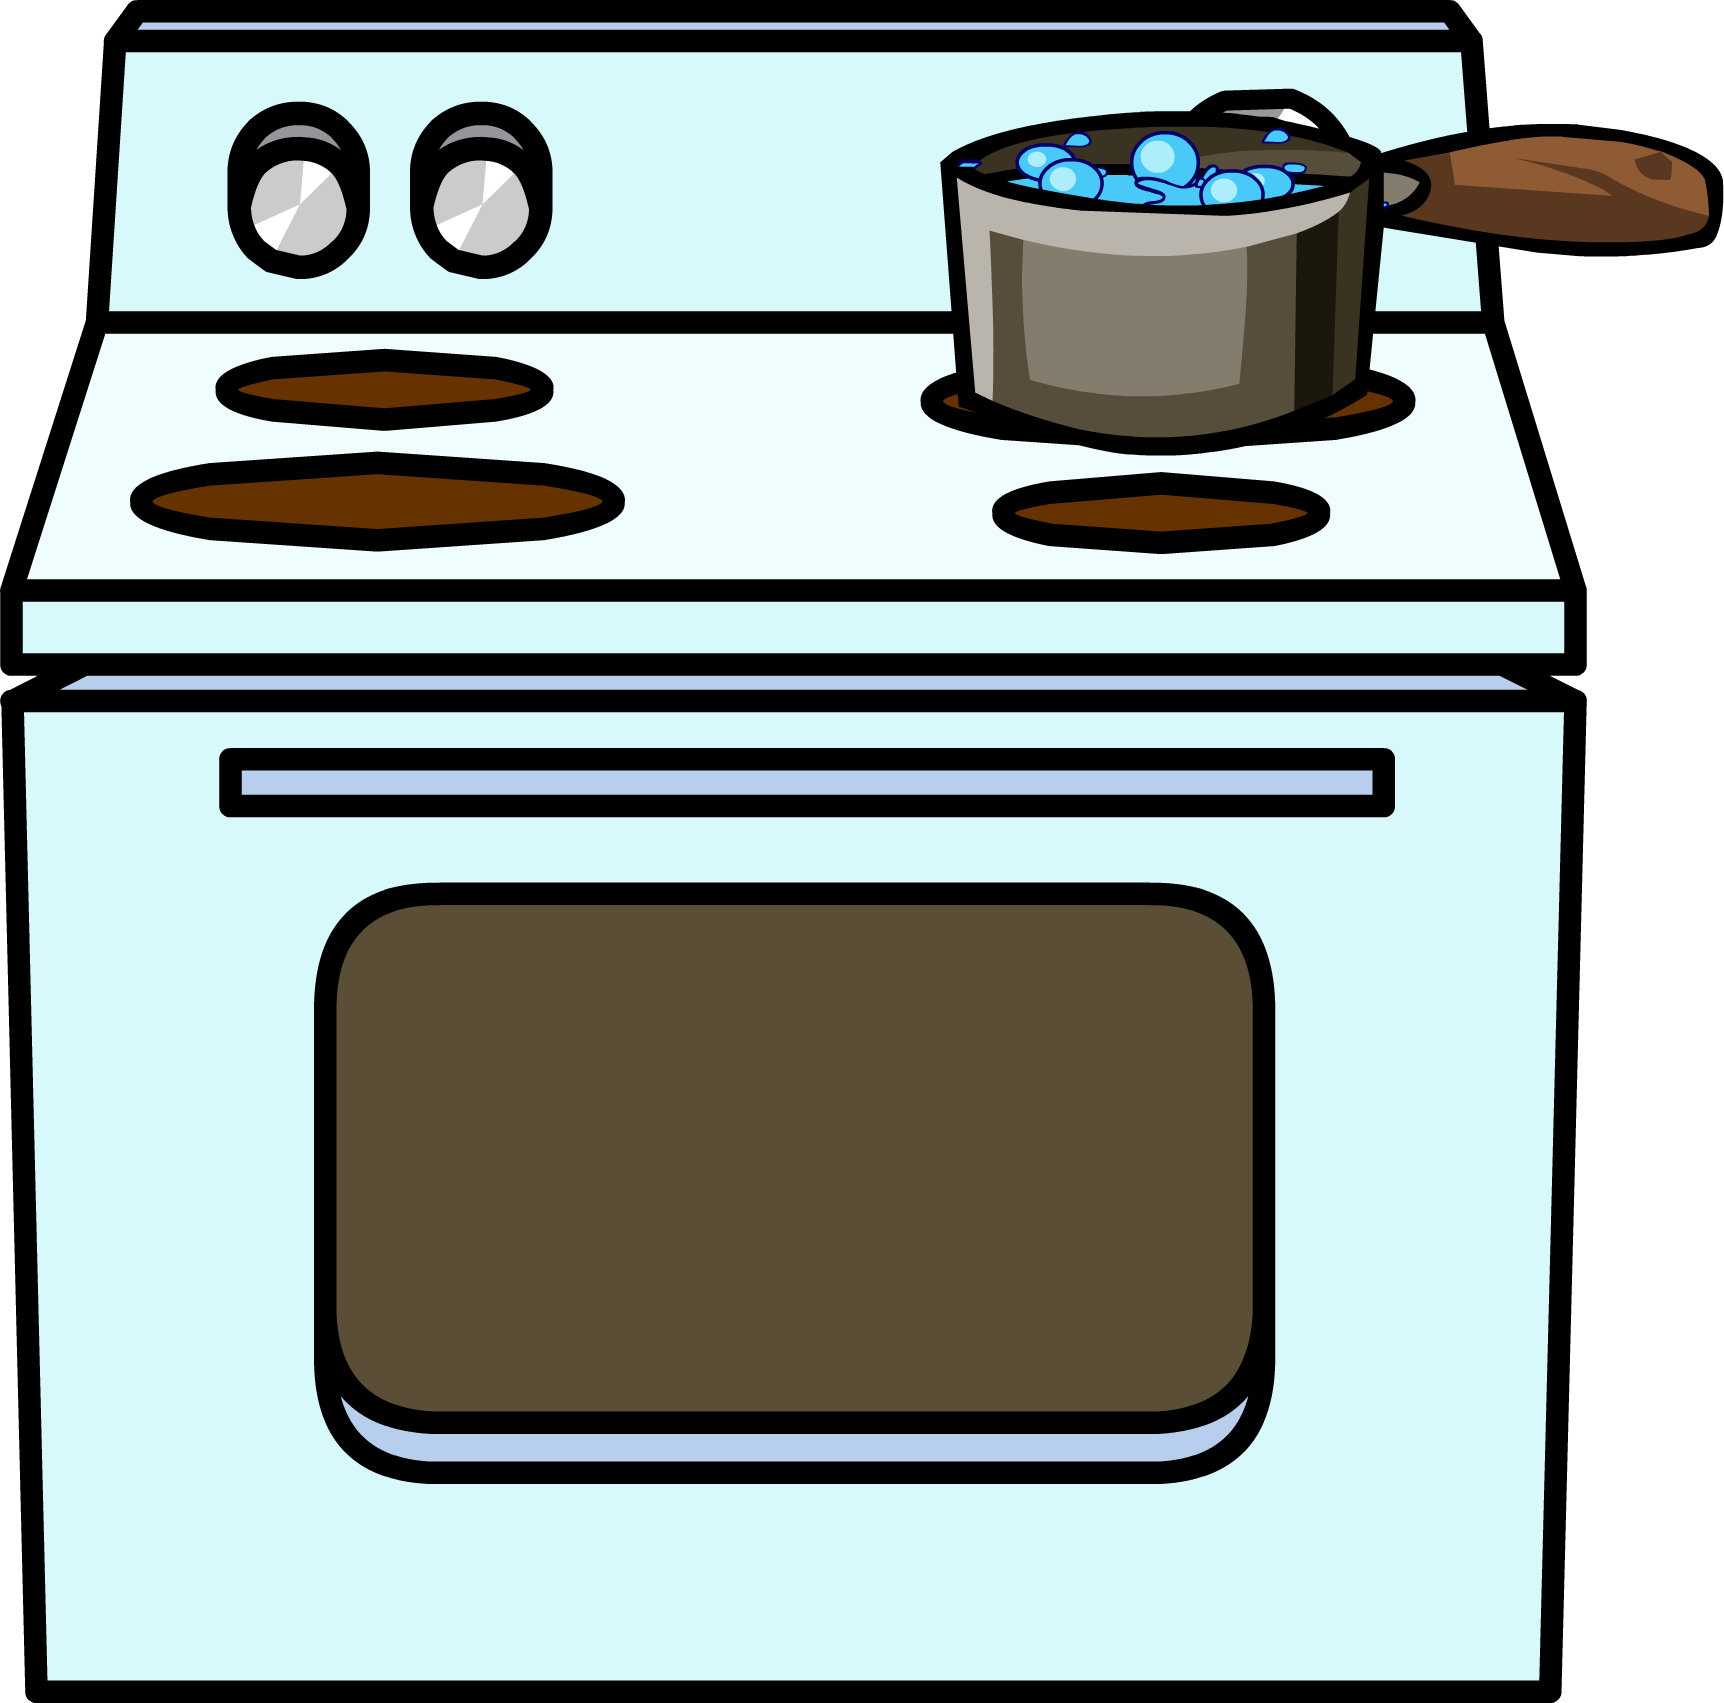 Stove Clipart at GetDrawings Free download